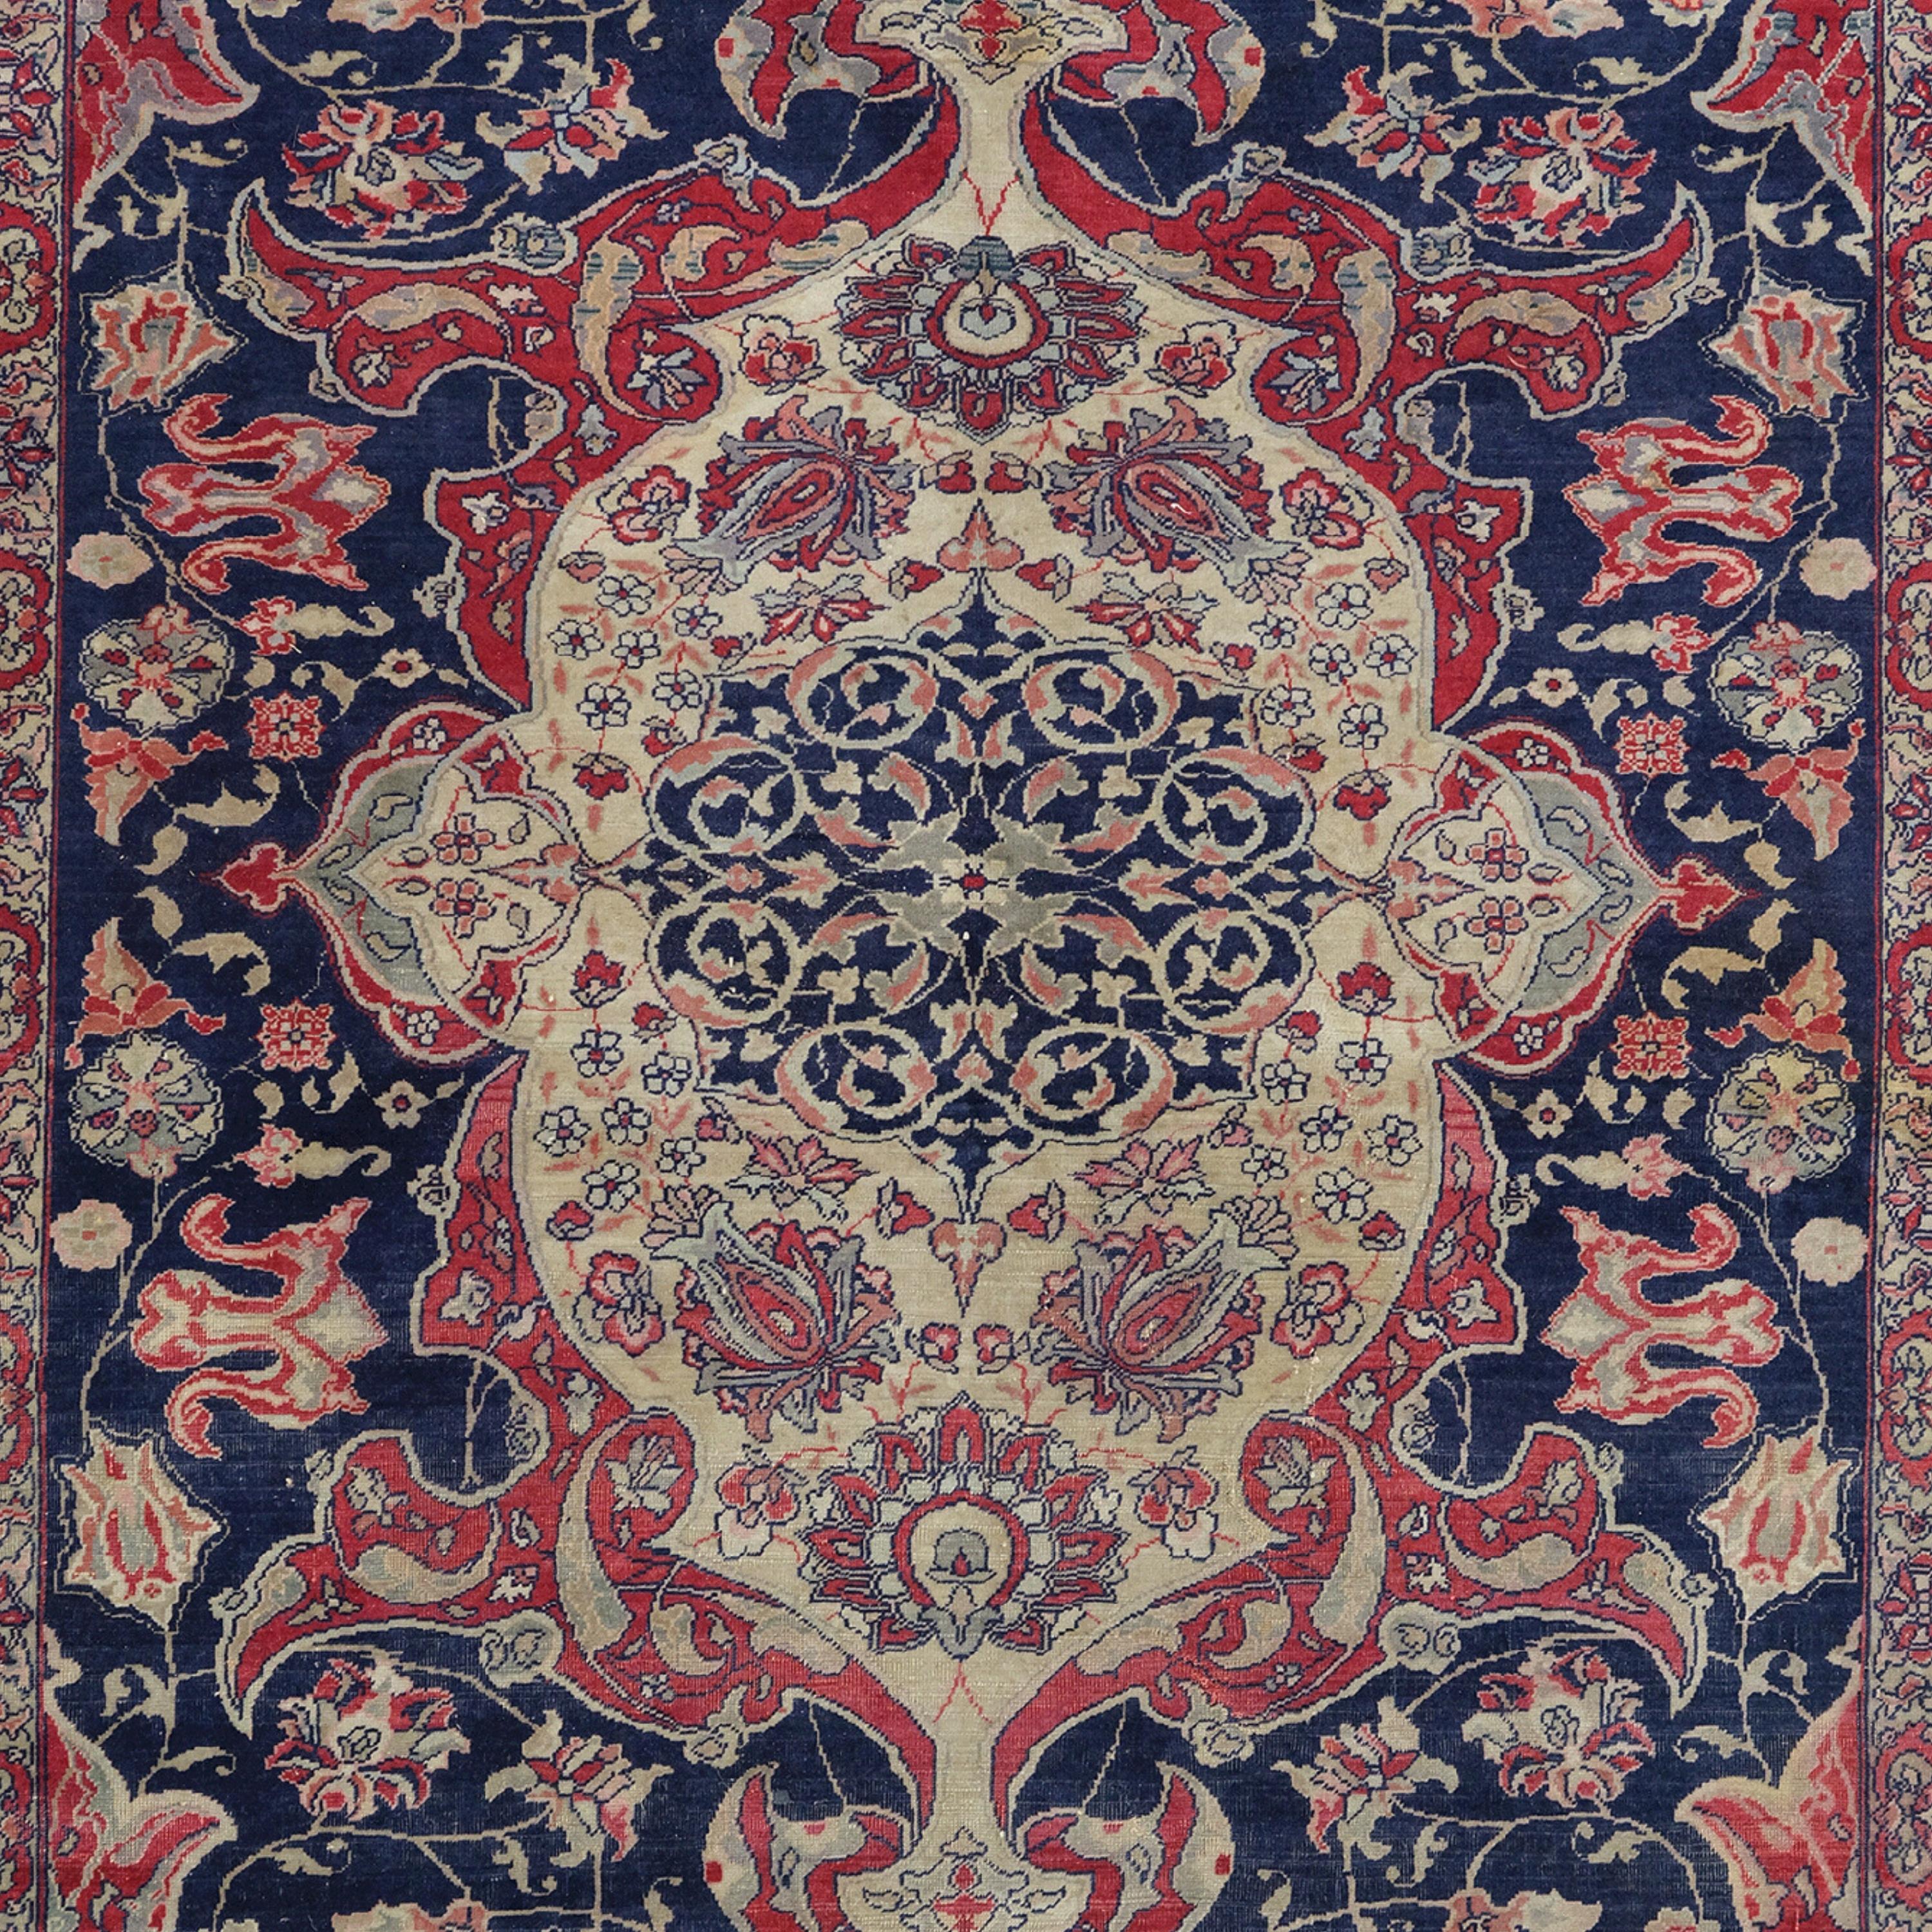 Turkish Antique Signed Feshane Rug - Late 19th Century Ottoman Period Signed Feshane Rug For Sale